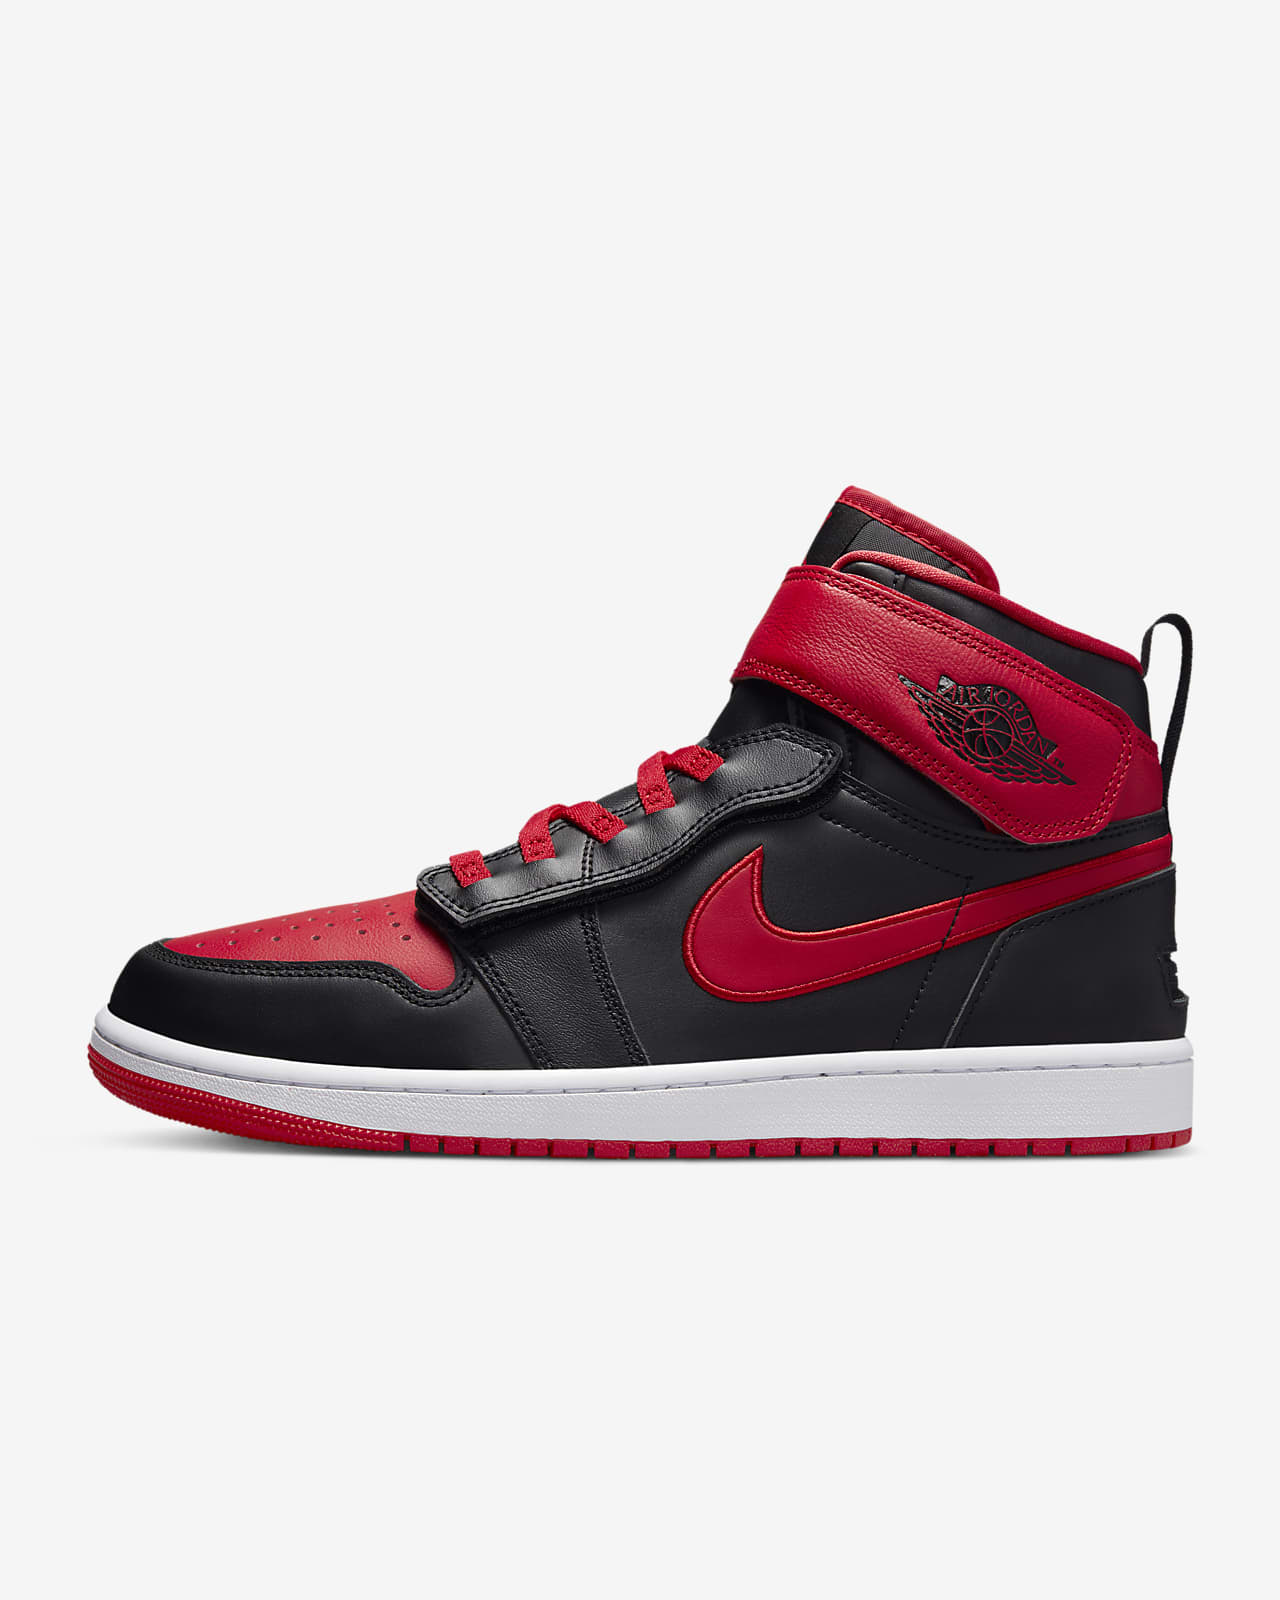 Accidental mouth Can be calculated Air Jordan 1 Hi FlyEase Men's Shoes. Nike.com